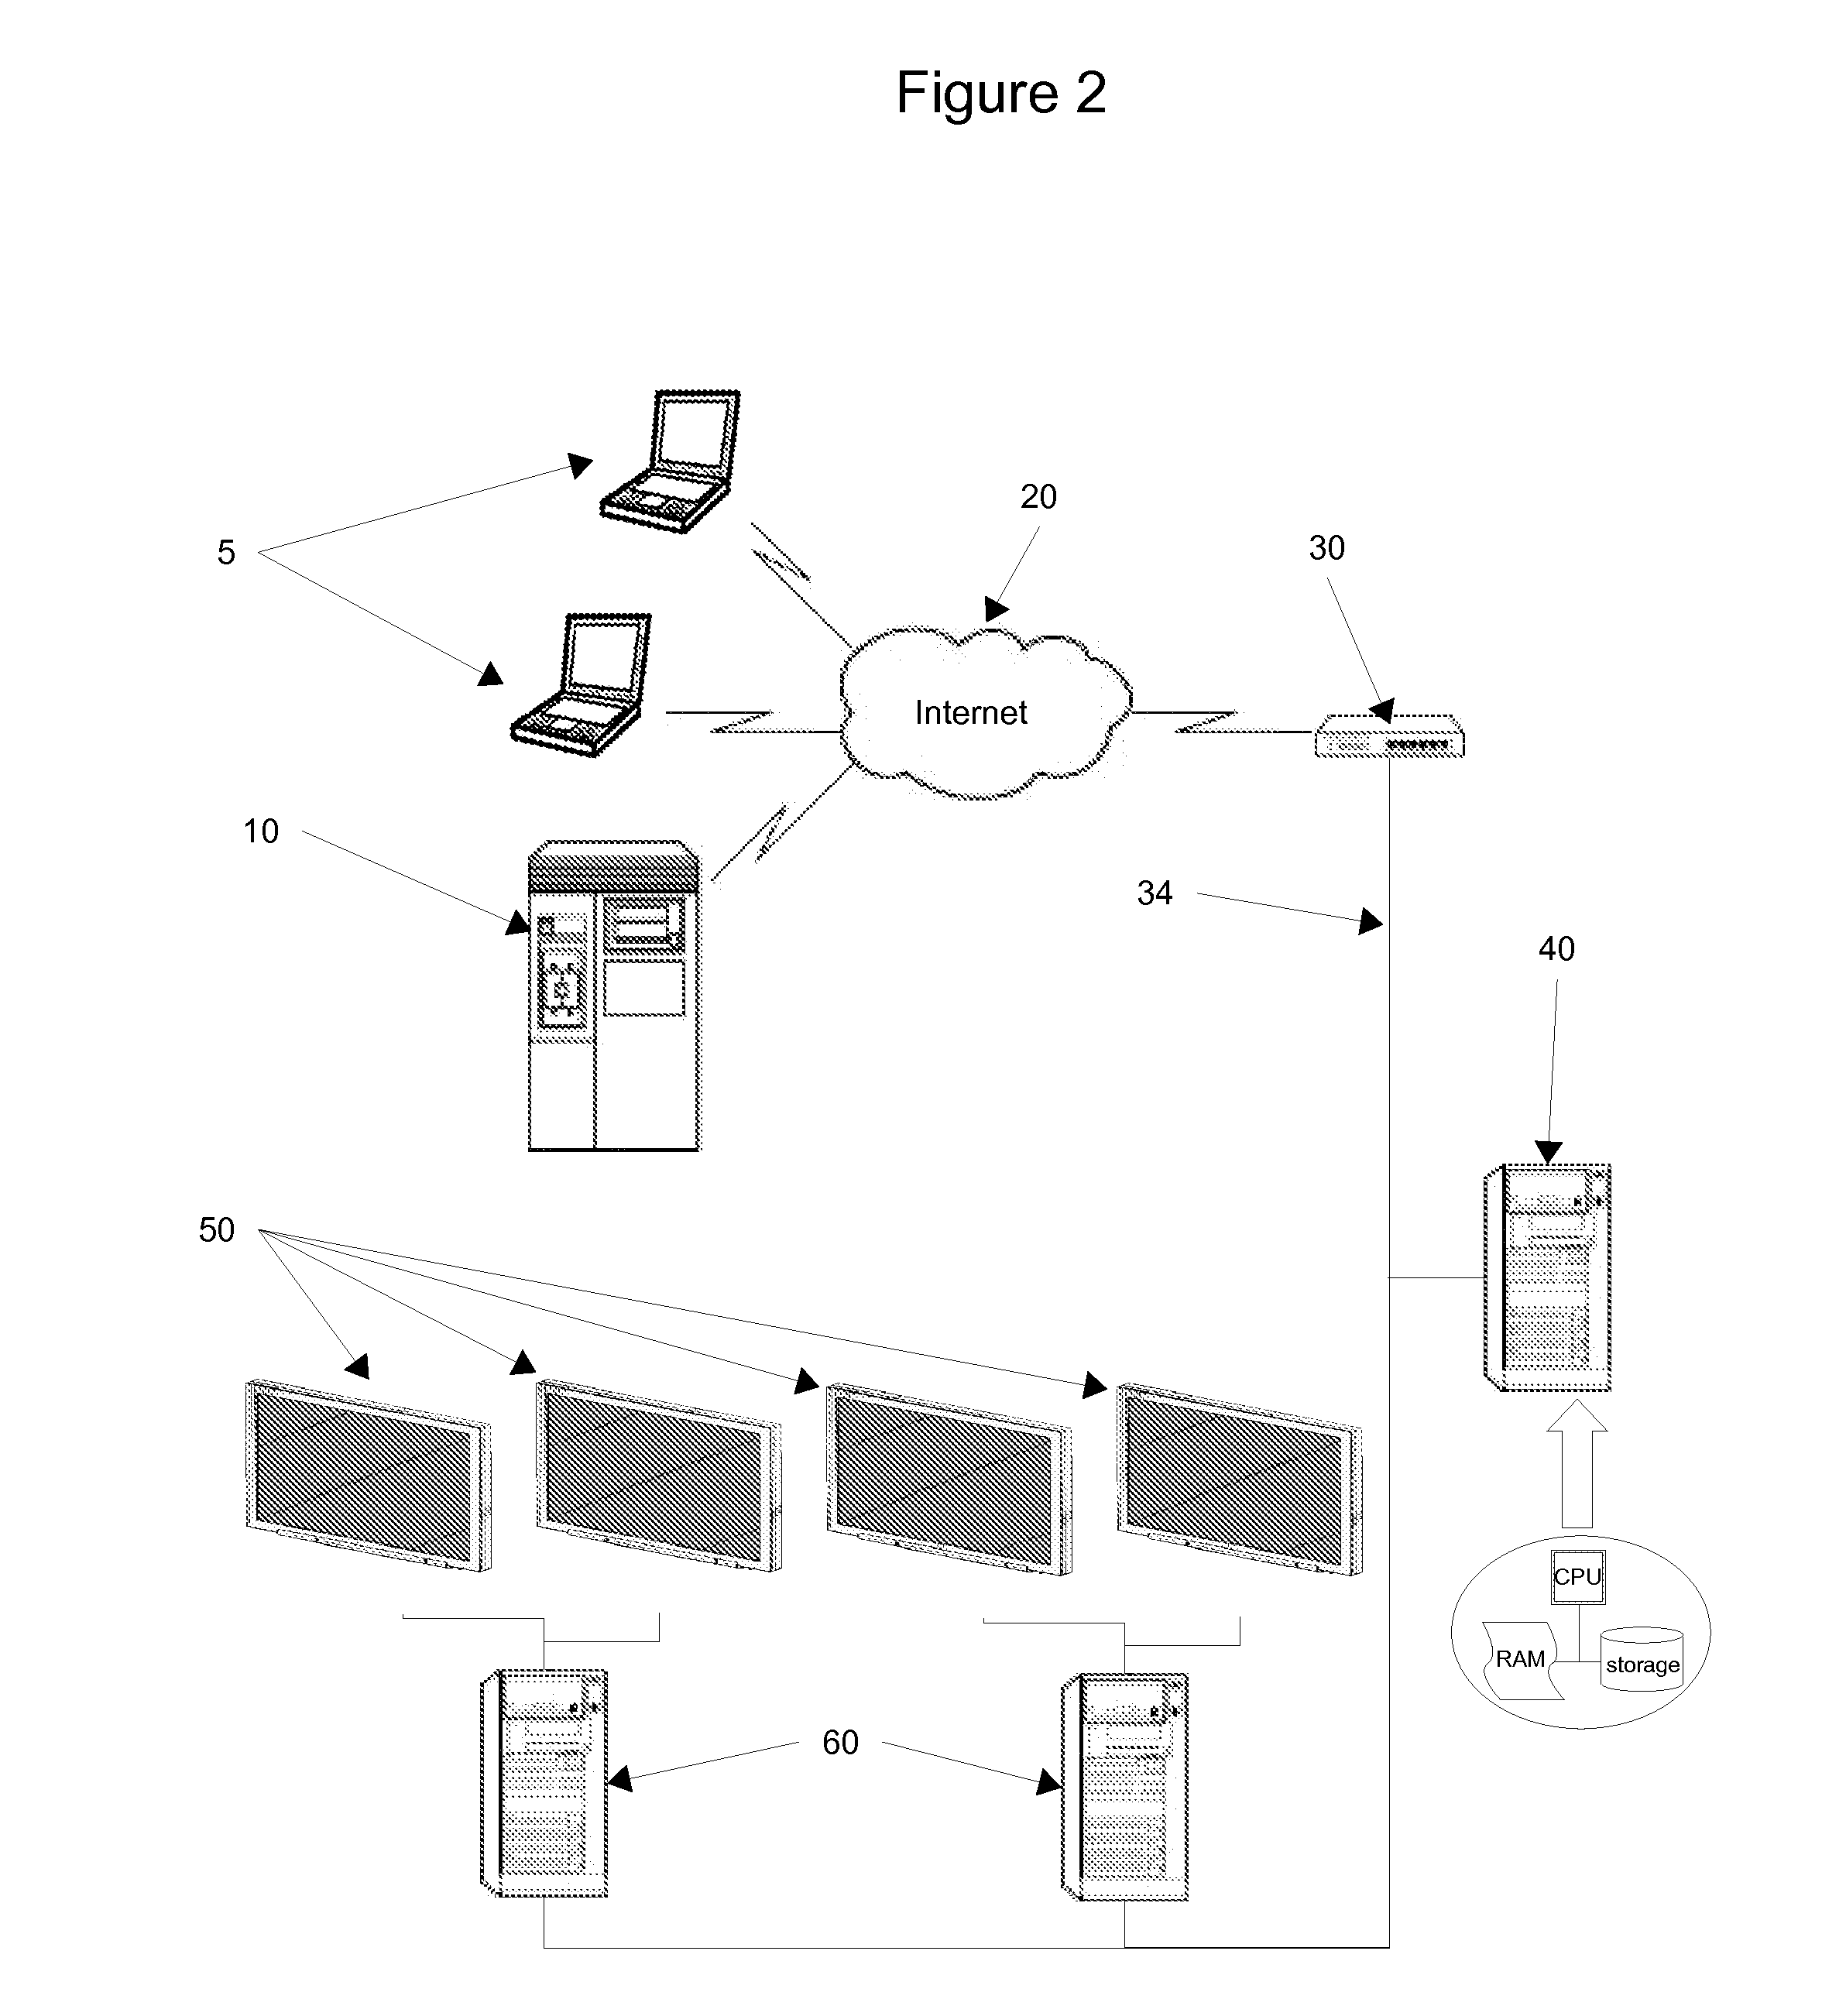 System, software application, and method for displaying third party media content in a public space